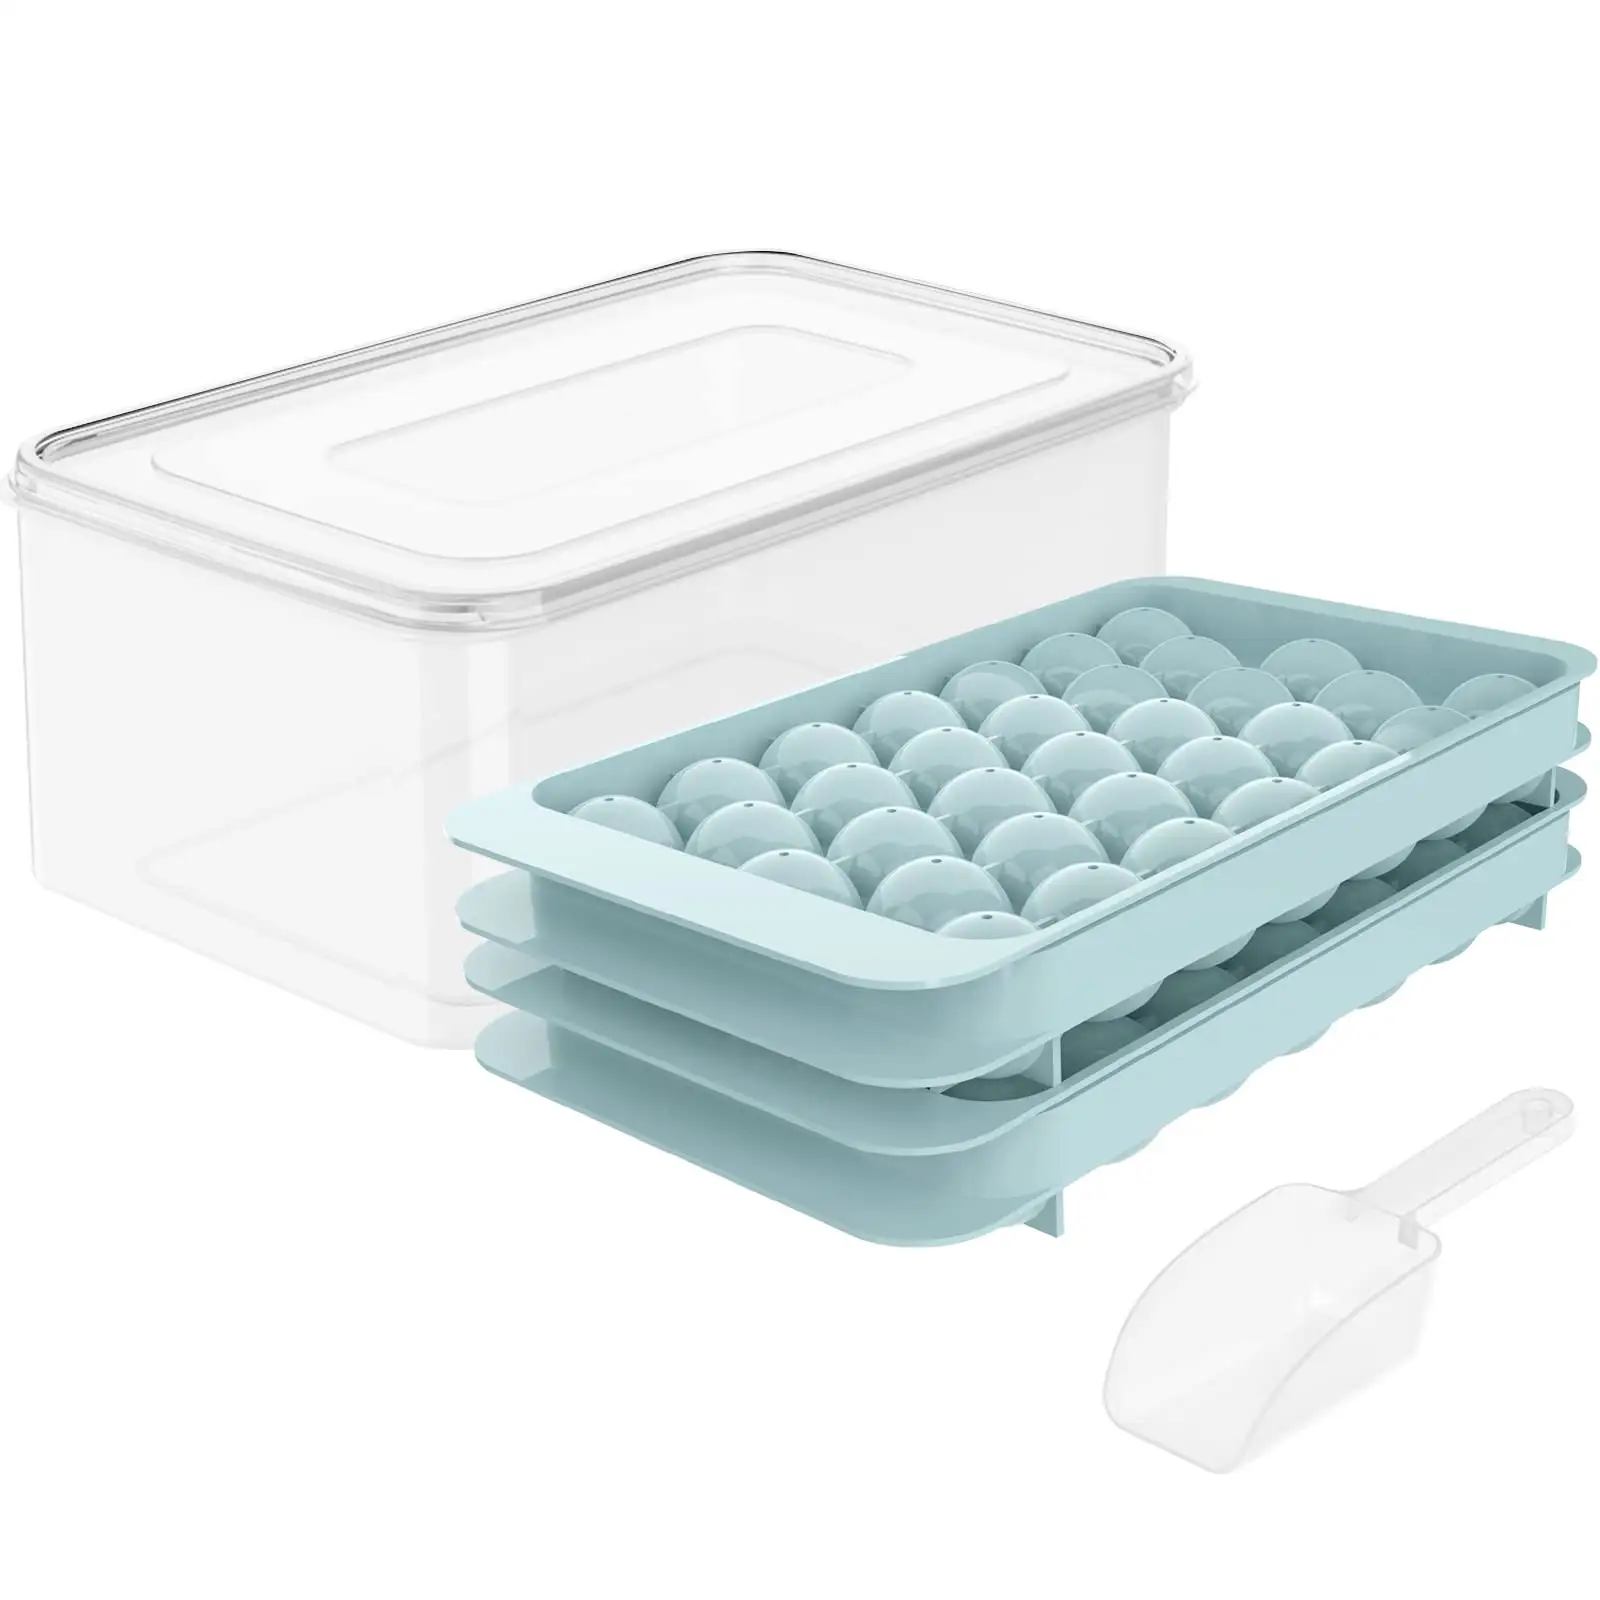 Ice cube tray mold with freeze container plastic ice cube tray with lid container scoop round ice ball maker